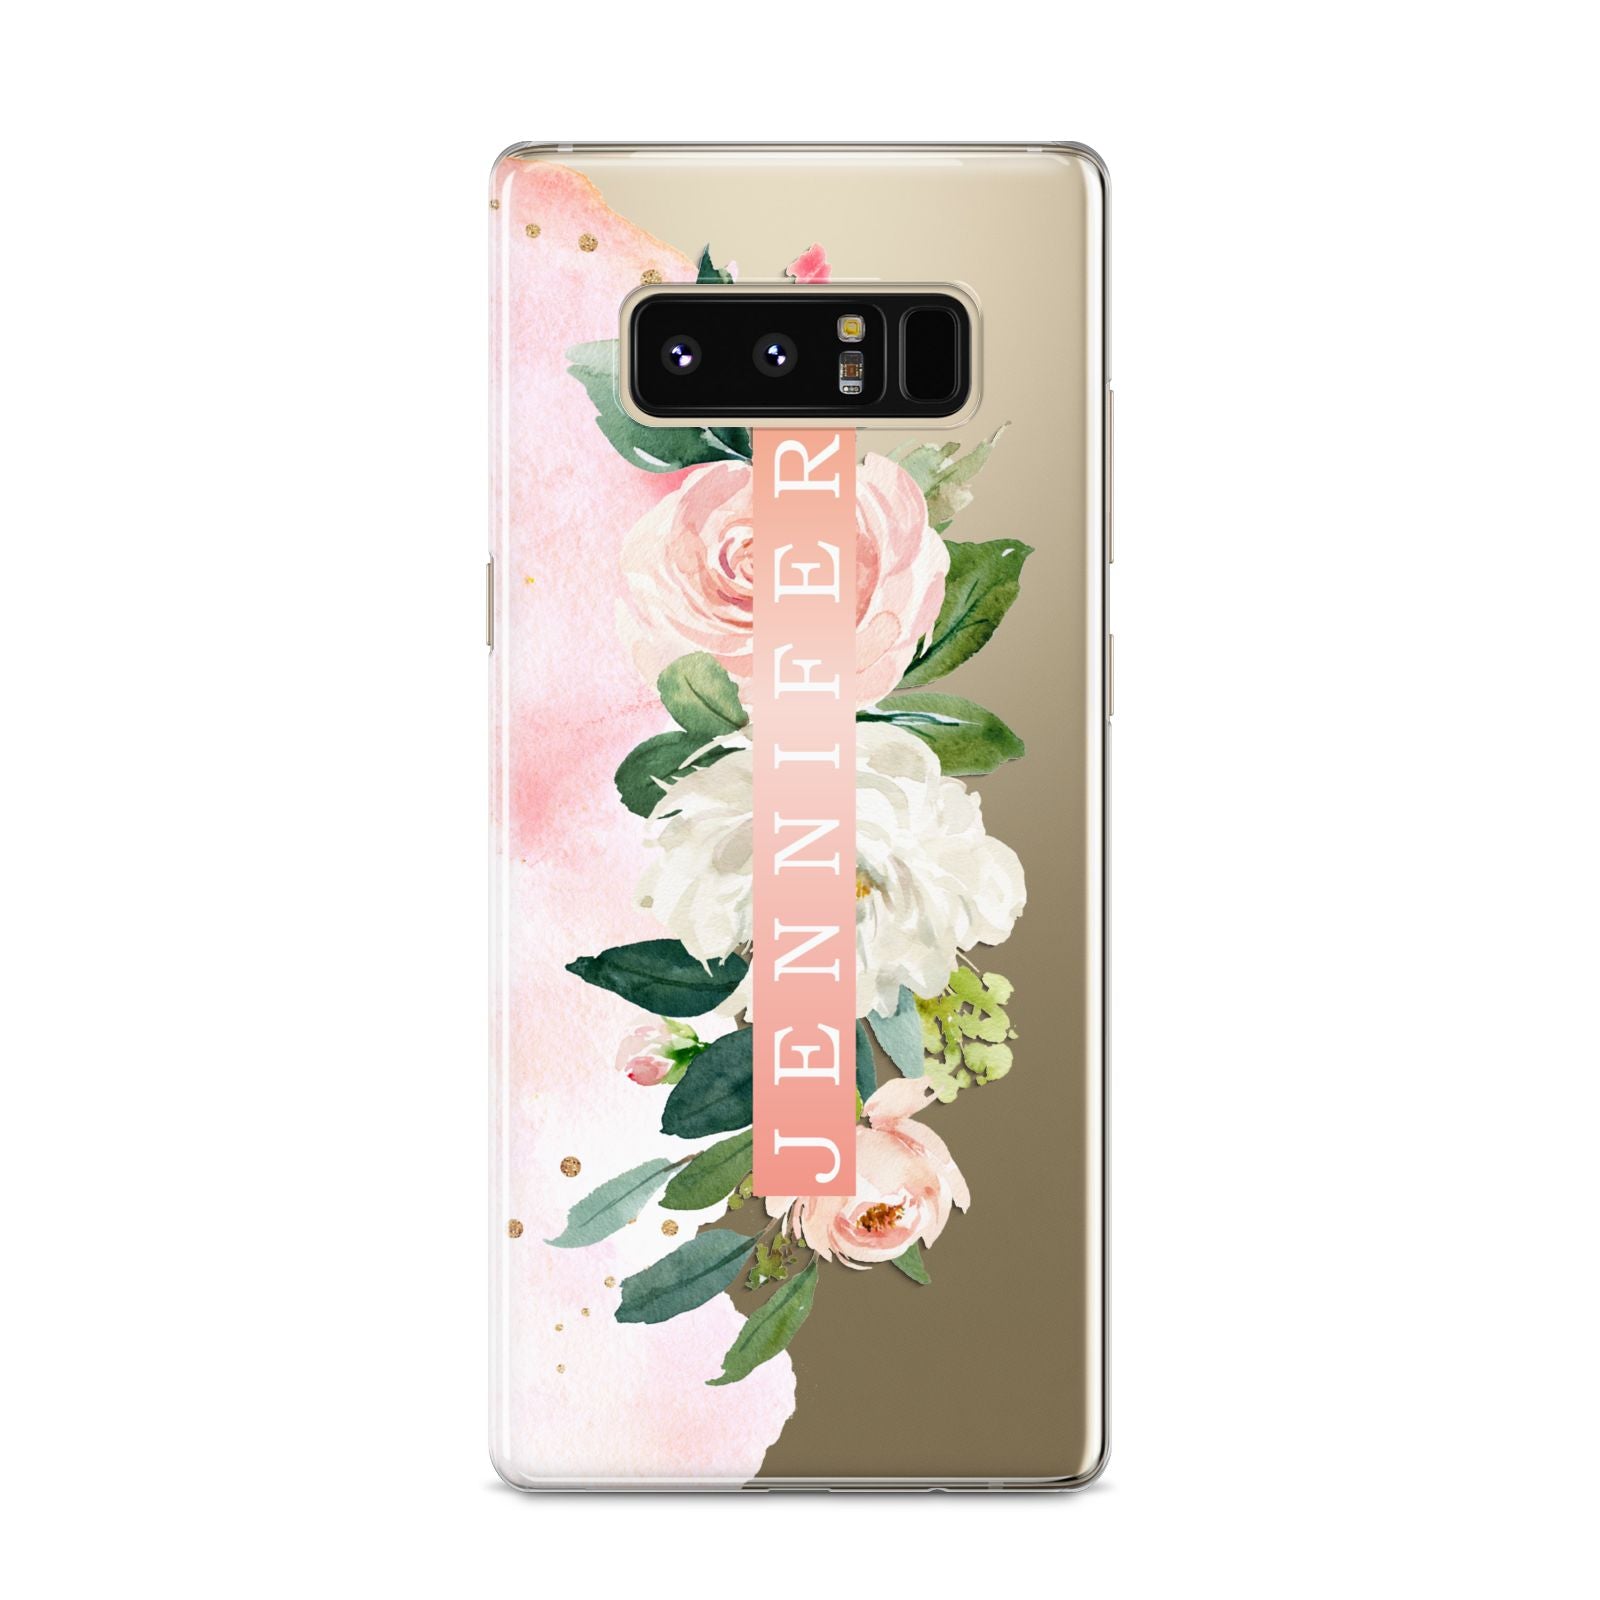 Blush Pink Personalised Name Floral Samsung Galaxy S8 Case